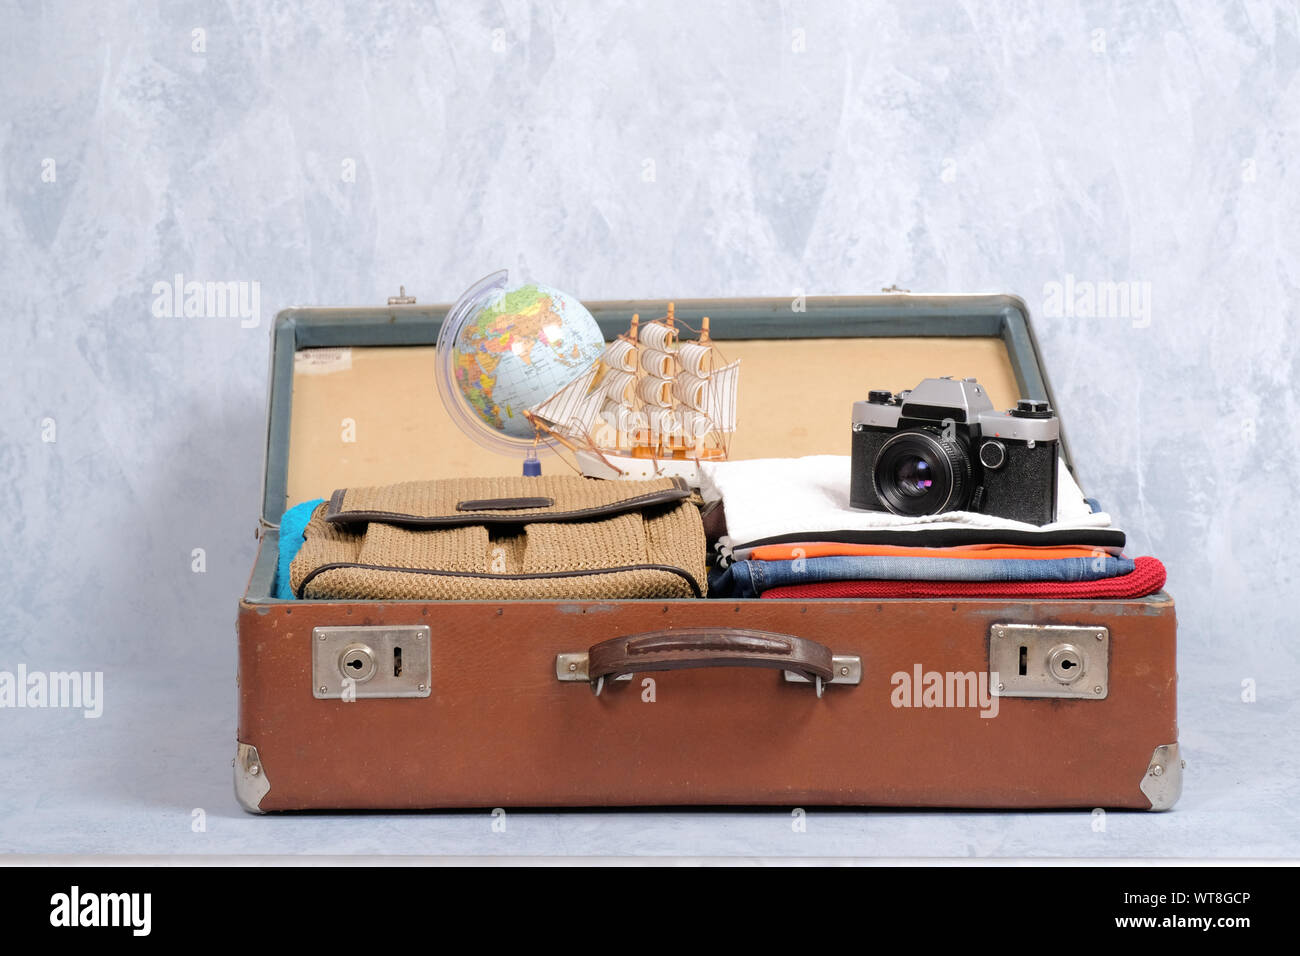 Full travel suitcase on grey background, opened case with travel clothing and accessories. Travel or tourism, vacation, holiday concept Stock Photo